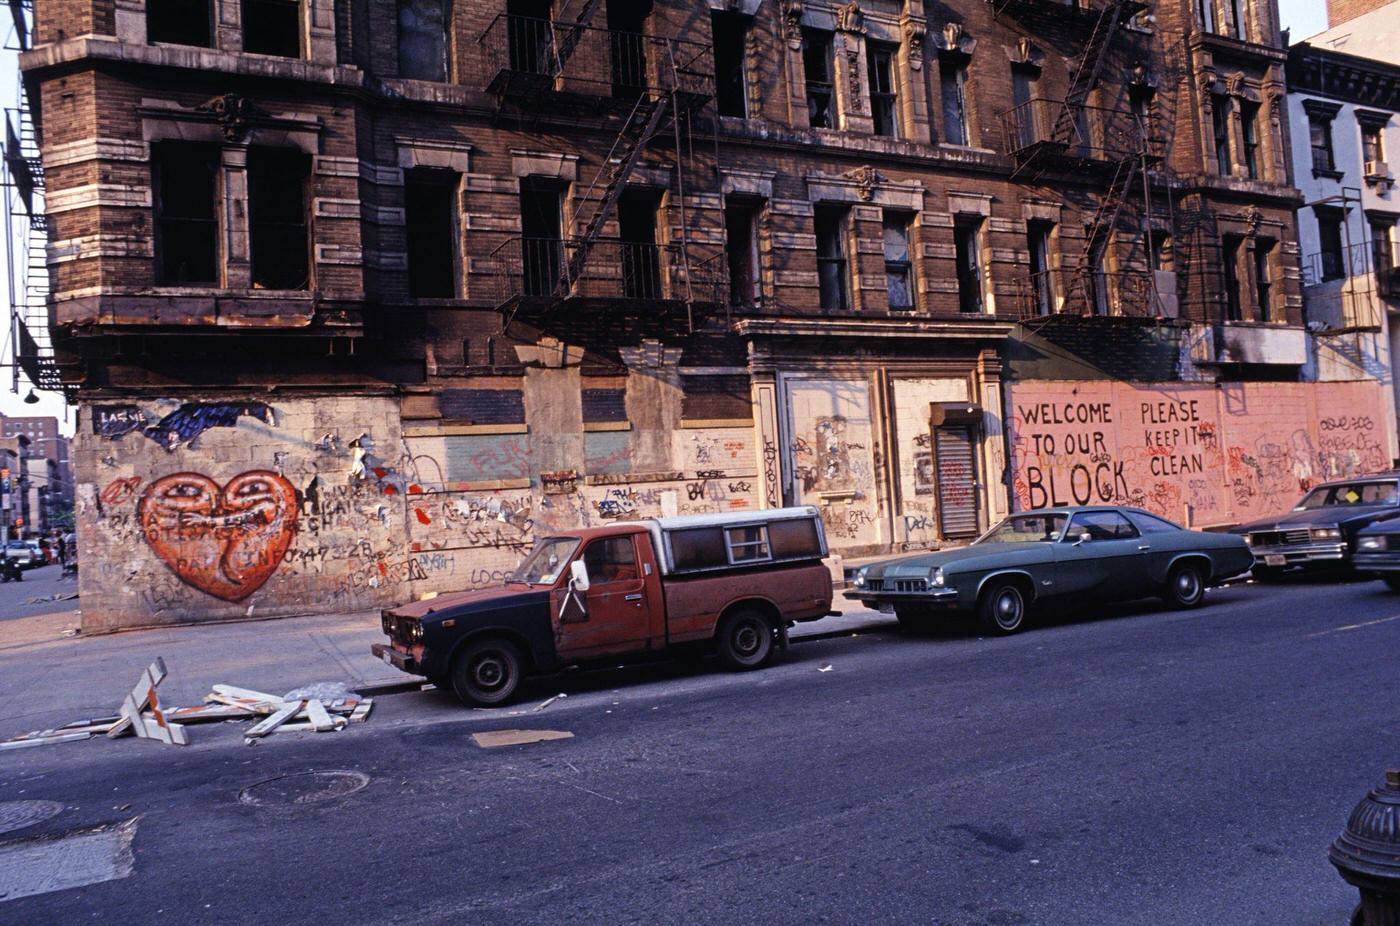 Graffiti-Covered Facade Of An Empty Building In The Lower East Side With Text 'Welcome To Our Block, Please Keep It Clean', Manhattan, 1990